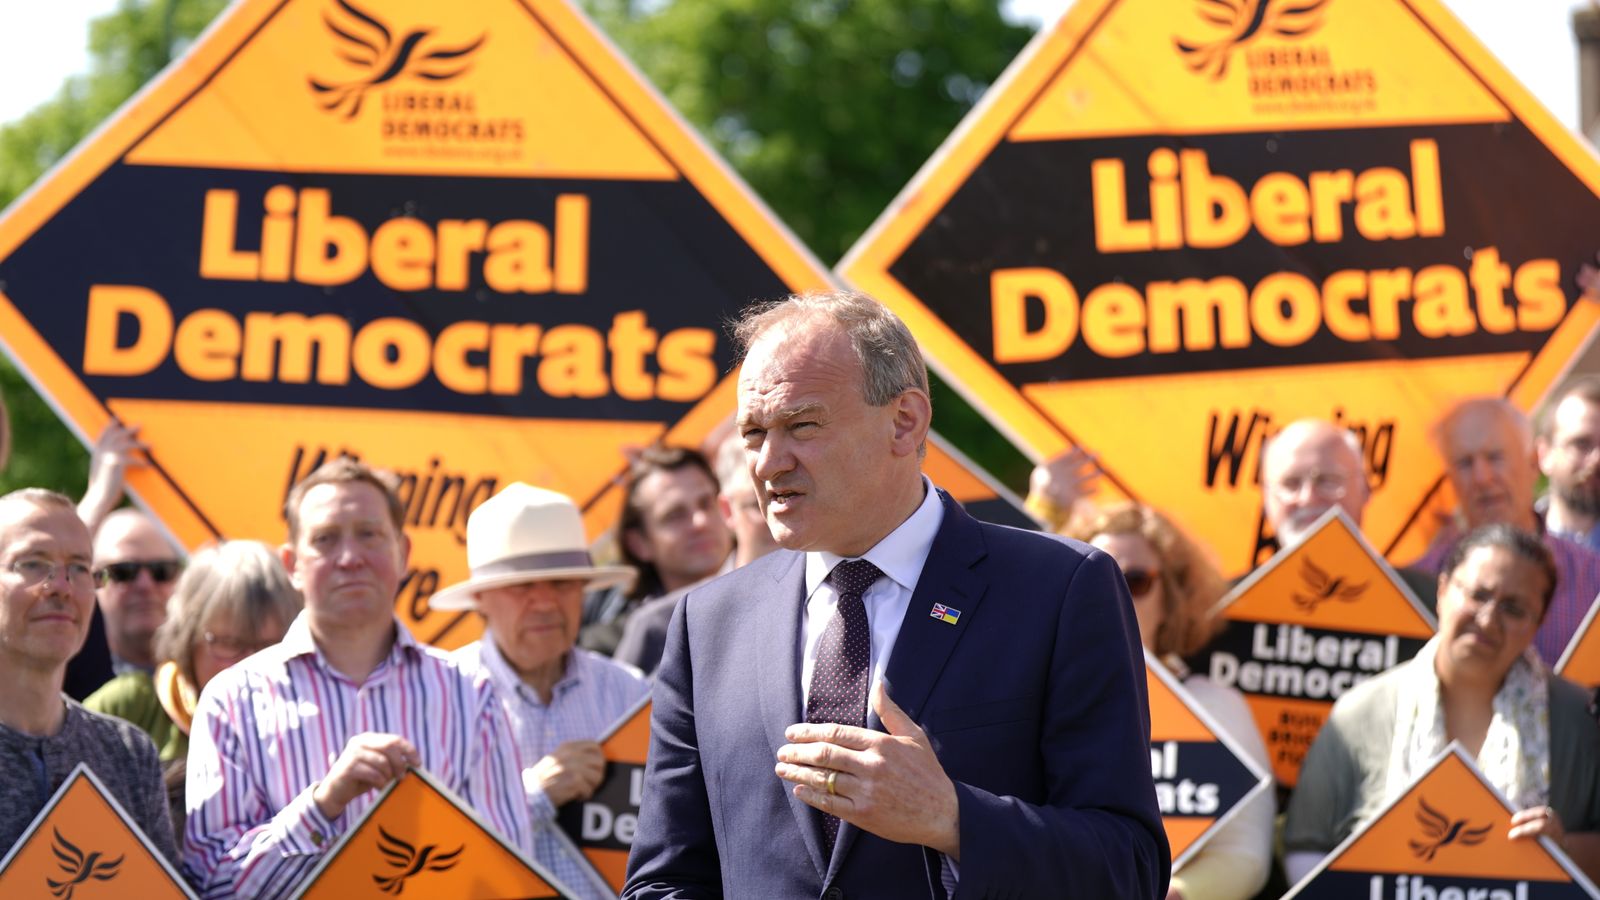 Lib Dems gear up for 'celebratory' conference - but can they keep up the momentum?